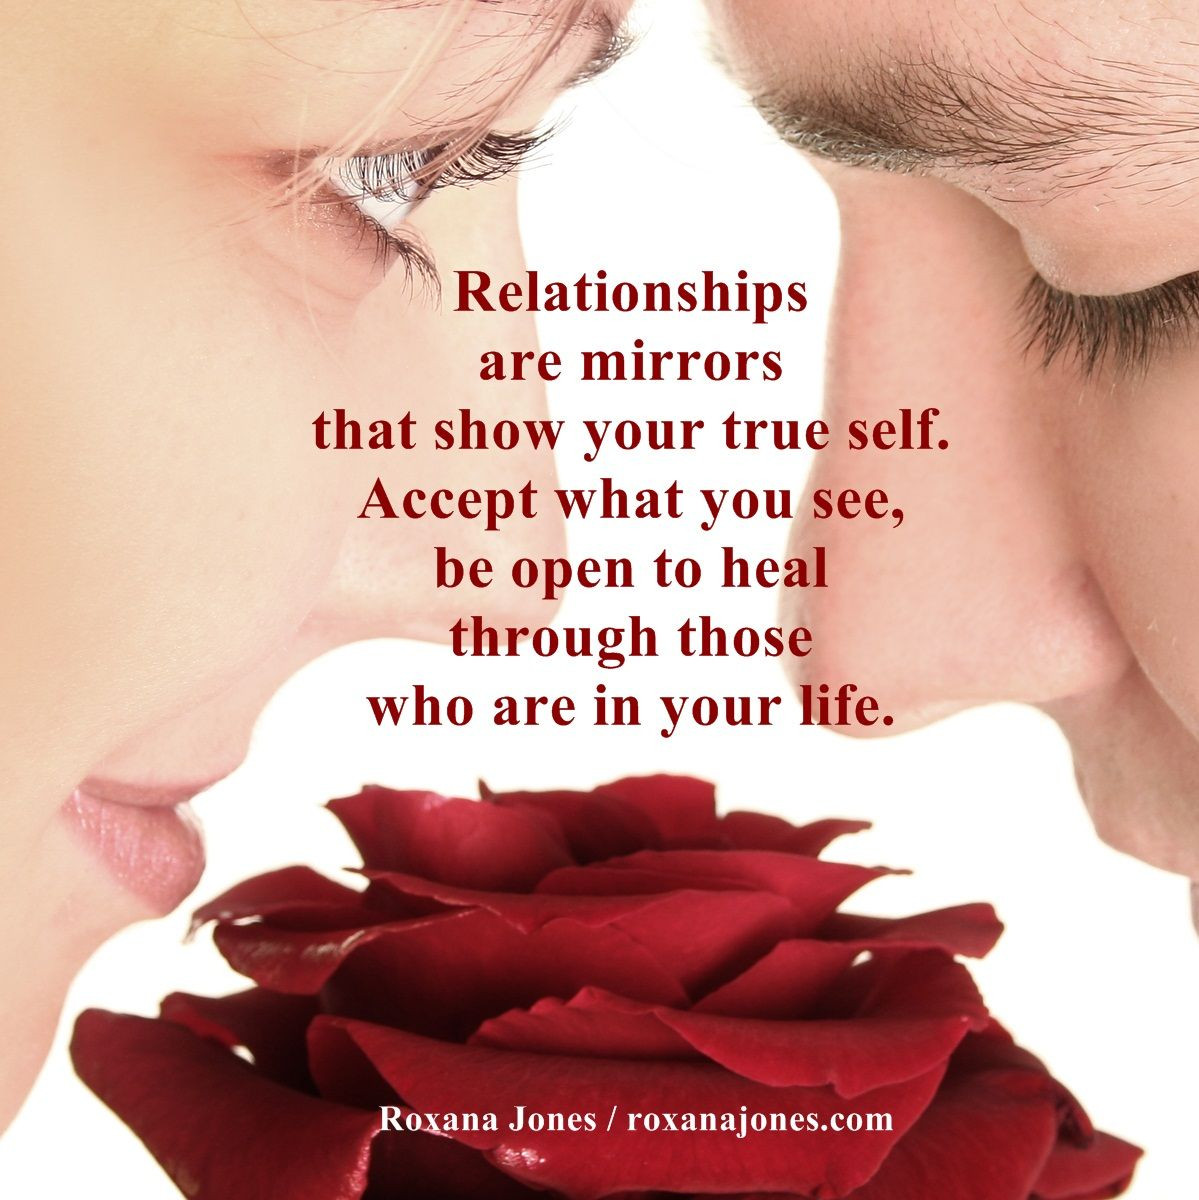 Motivational Relationship Quotes
 Inspirational Quotes About Relationships QuotesGram